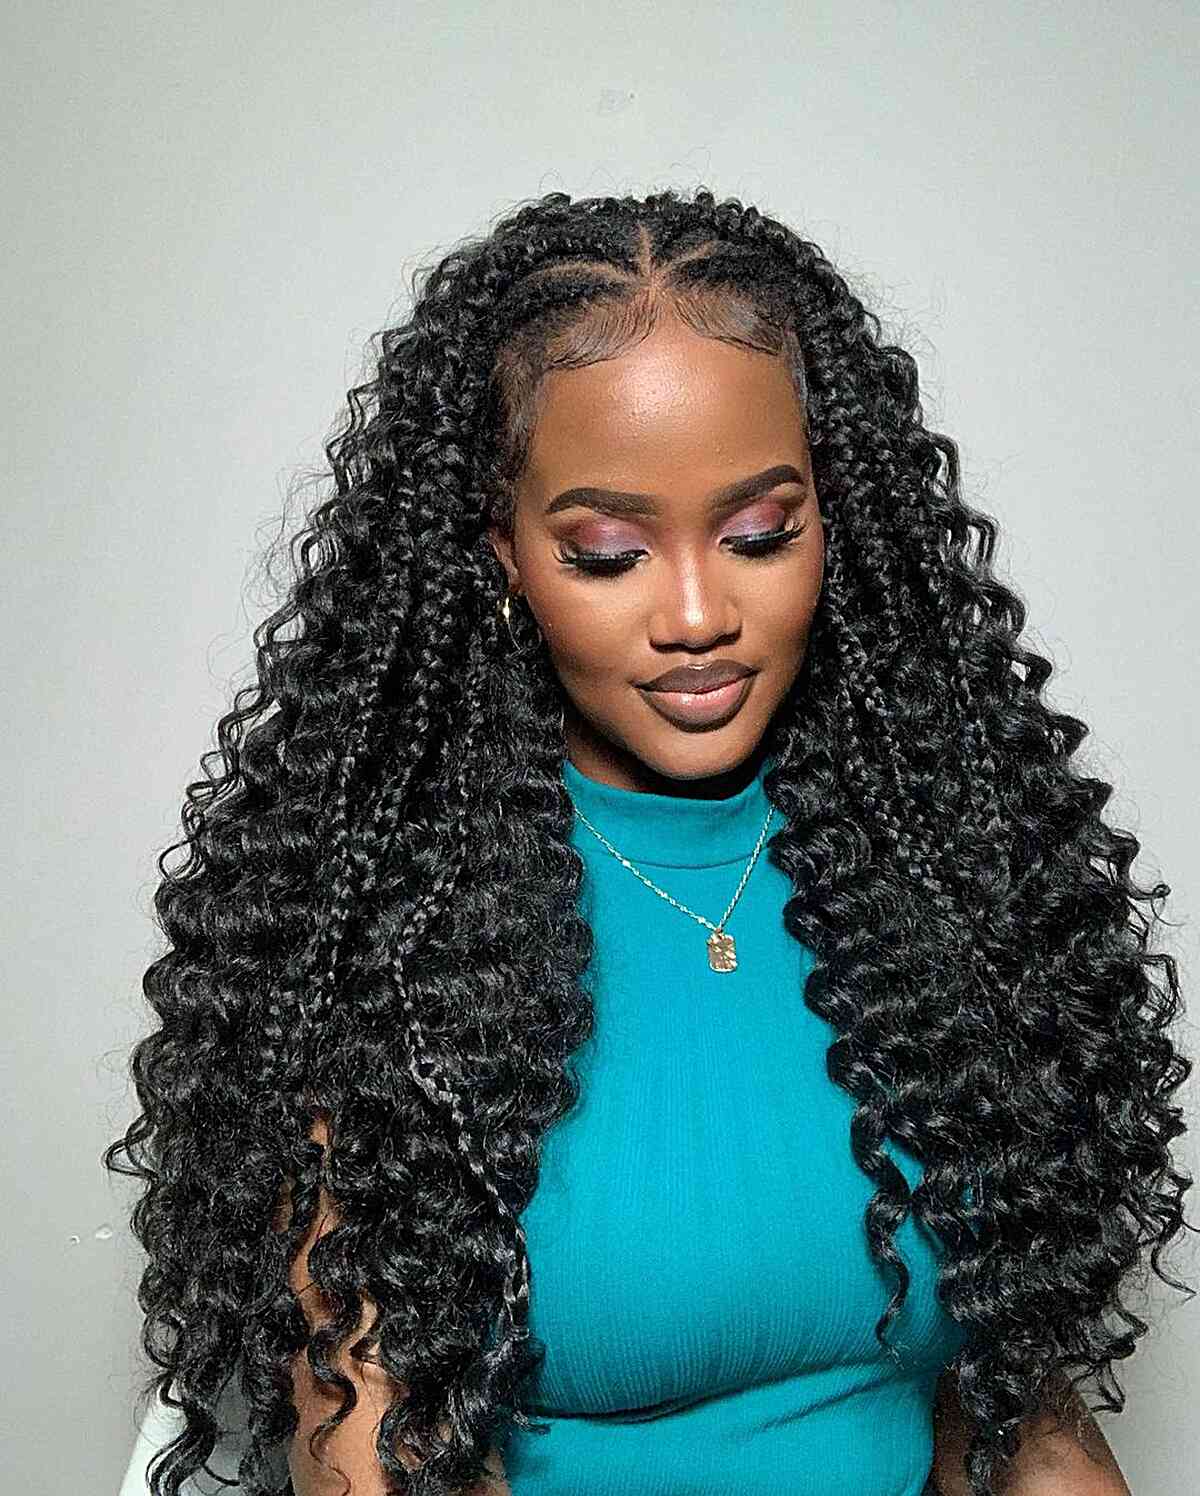 Should I Use Human Hair Crochet For A Brand New Look?